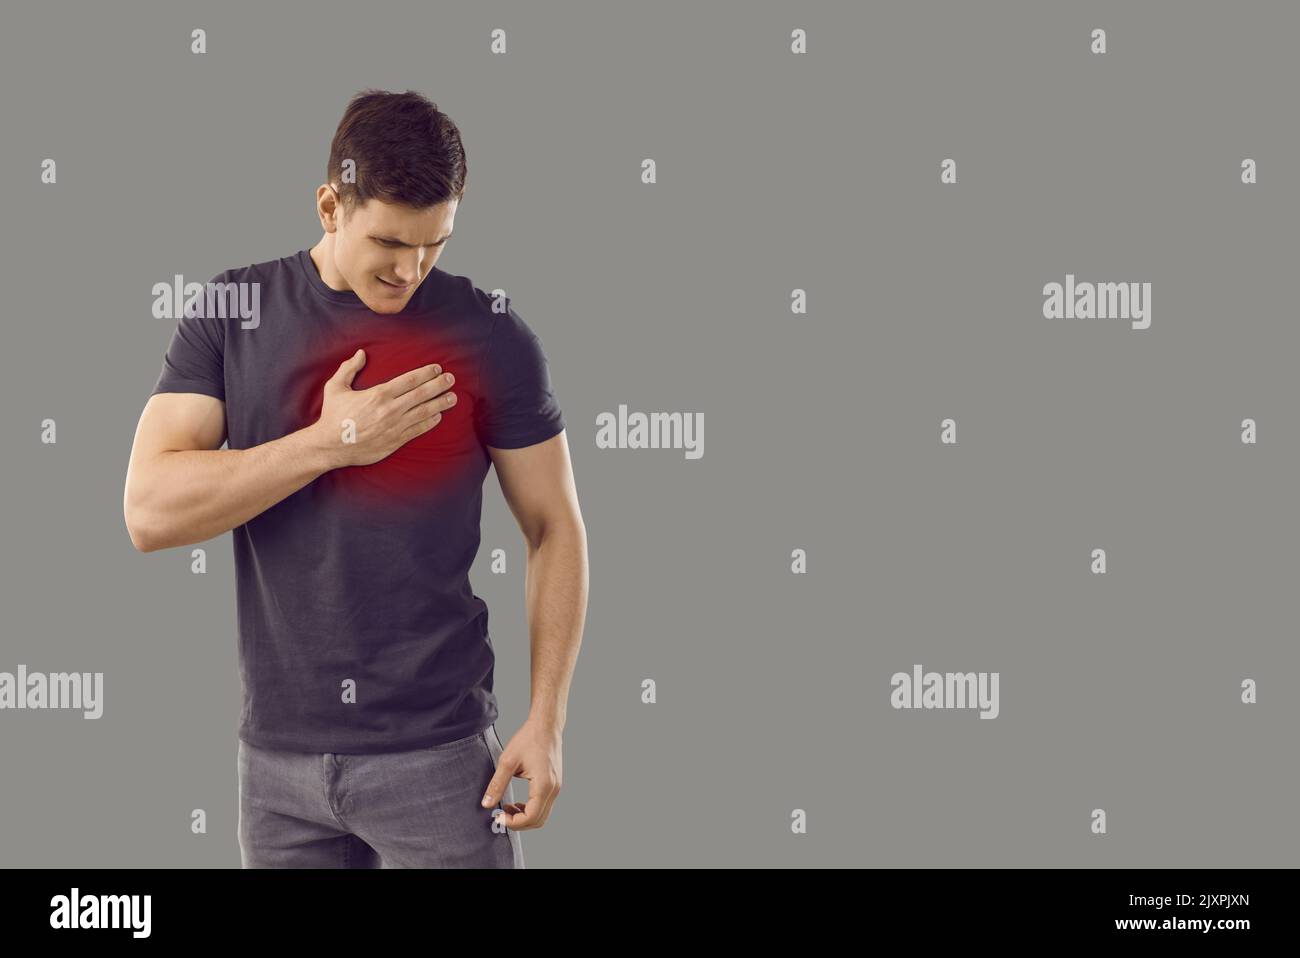 Man isolated on copy space background suffering from heart pain and touching his chest Stock Photo